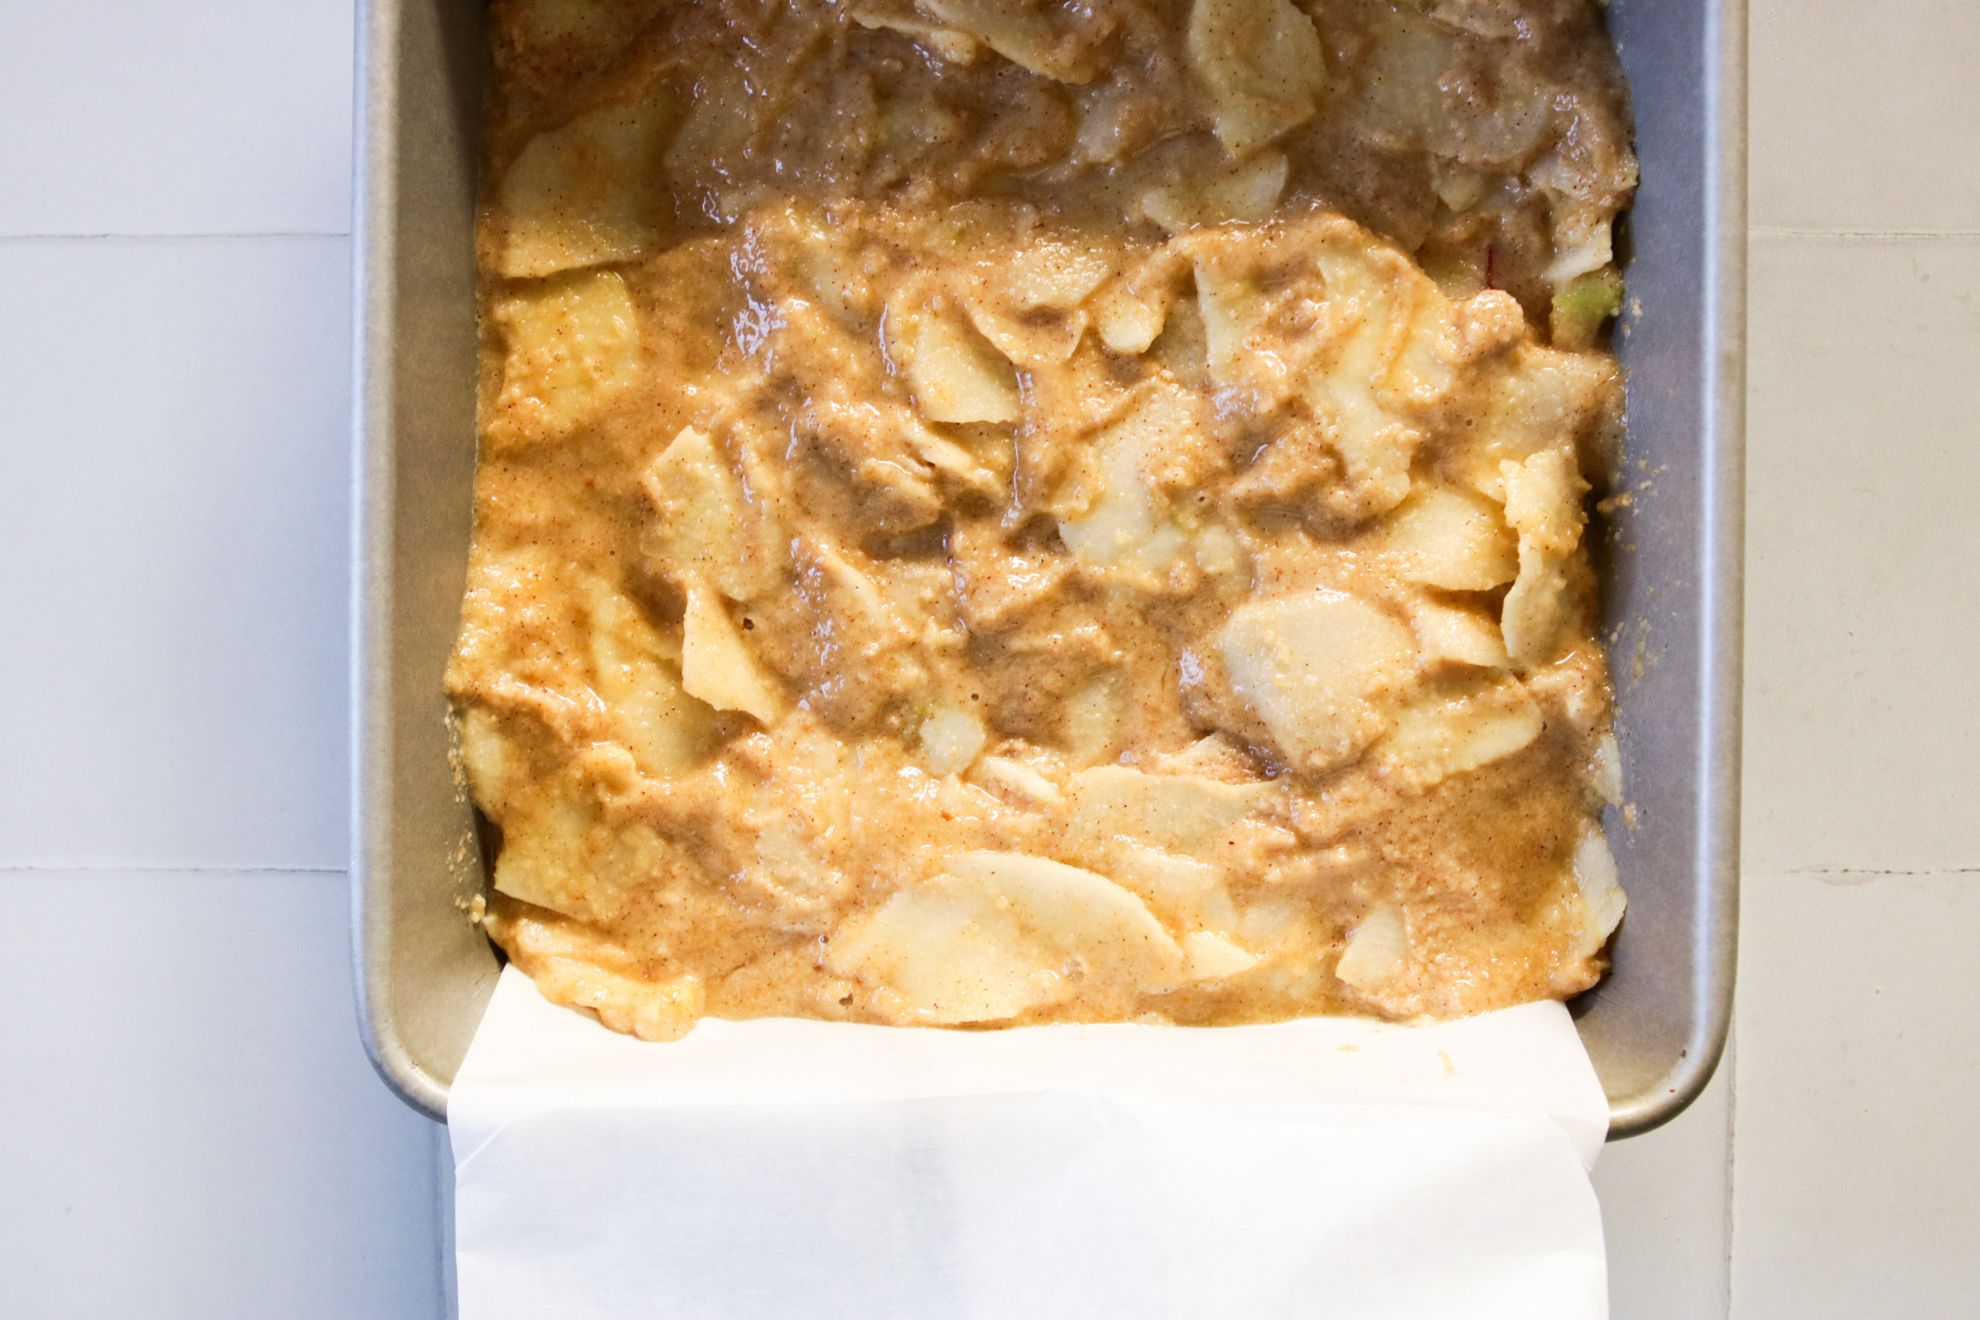 This is an overhead horizontal image of a silver square pan lined with parchment paper. In the pan is a raw cake batter with a lot of apple slices in it. The pan sits on a white square tile counter.